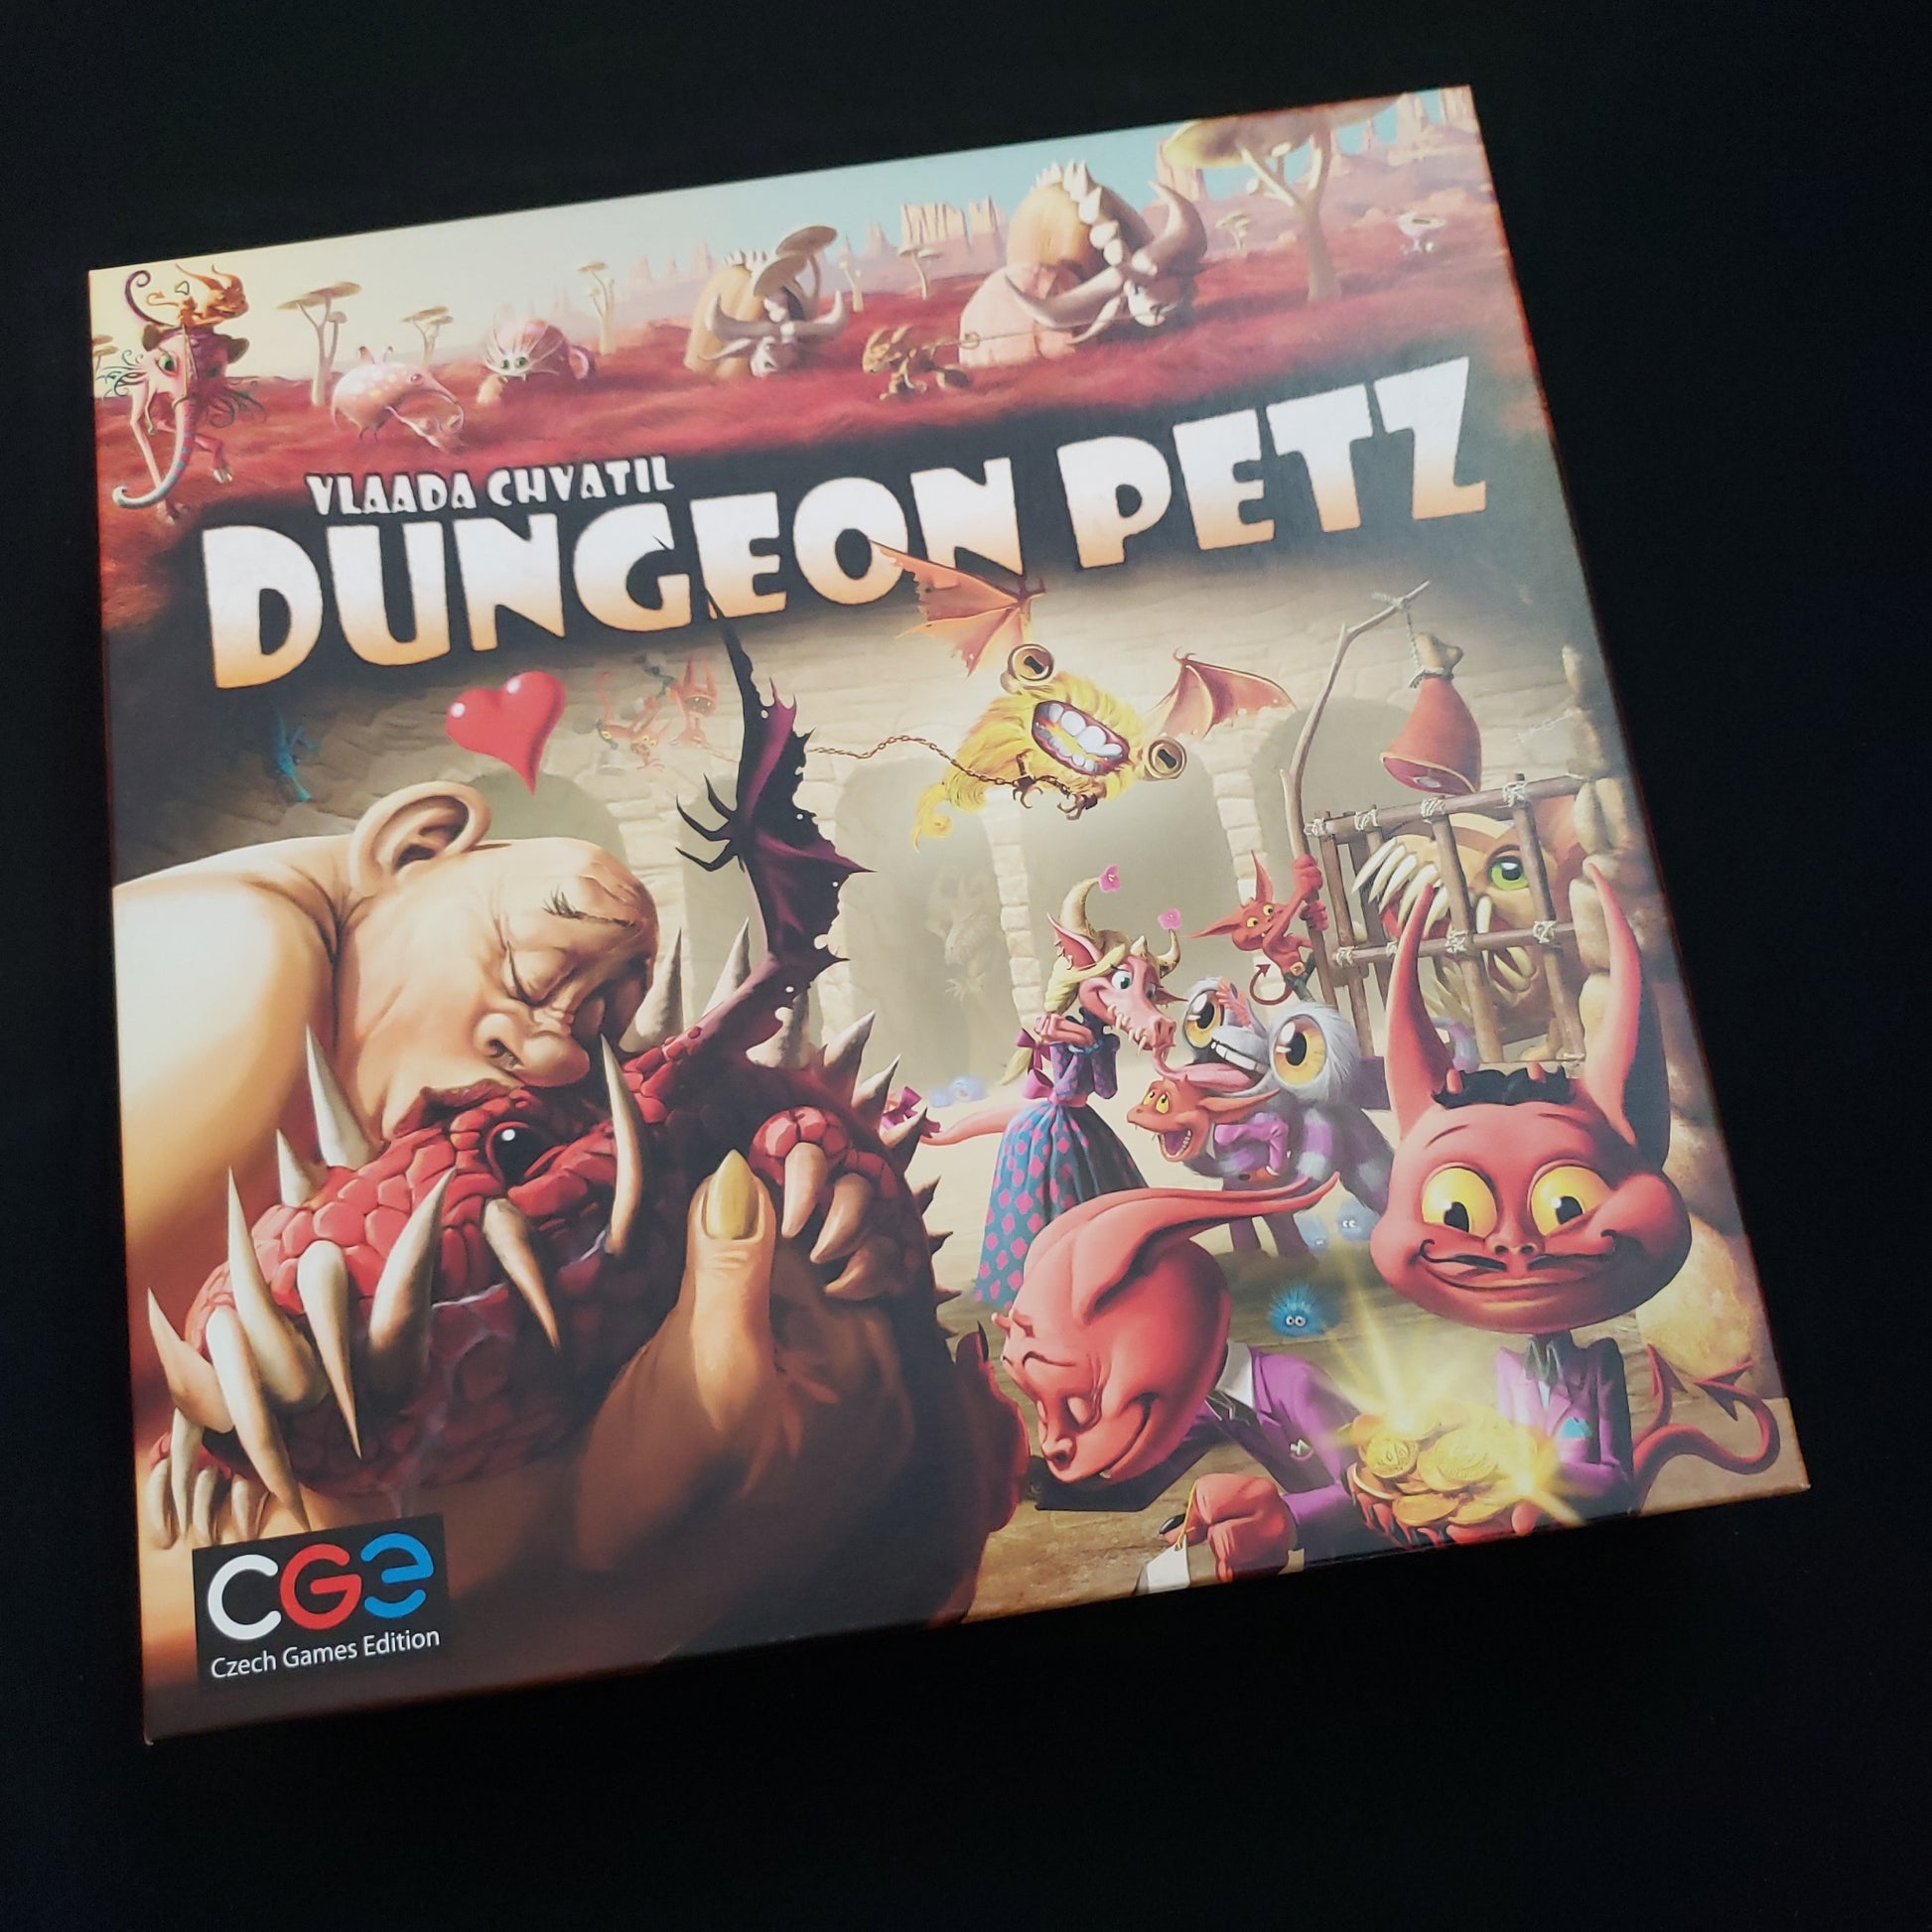 Image shows the front cover of the box of the Dungeon Petz board game